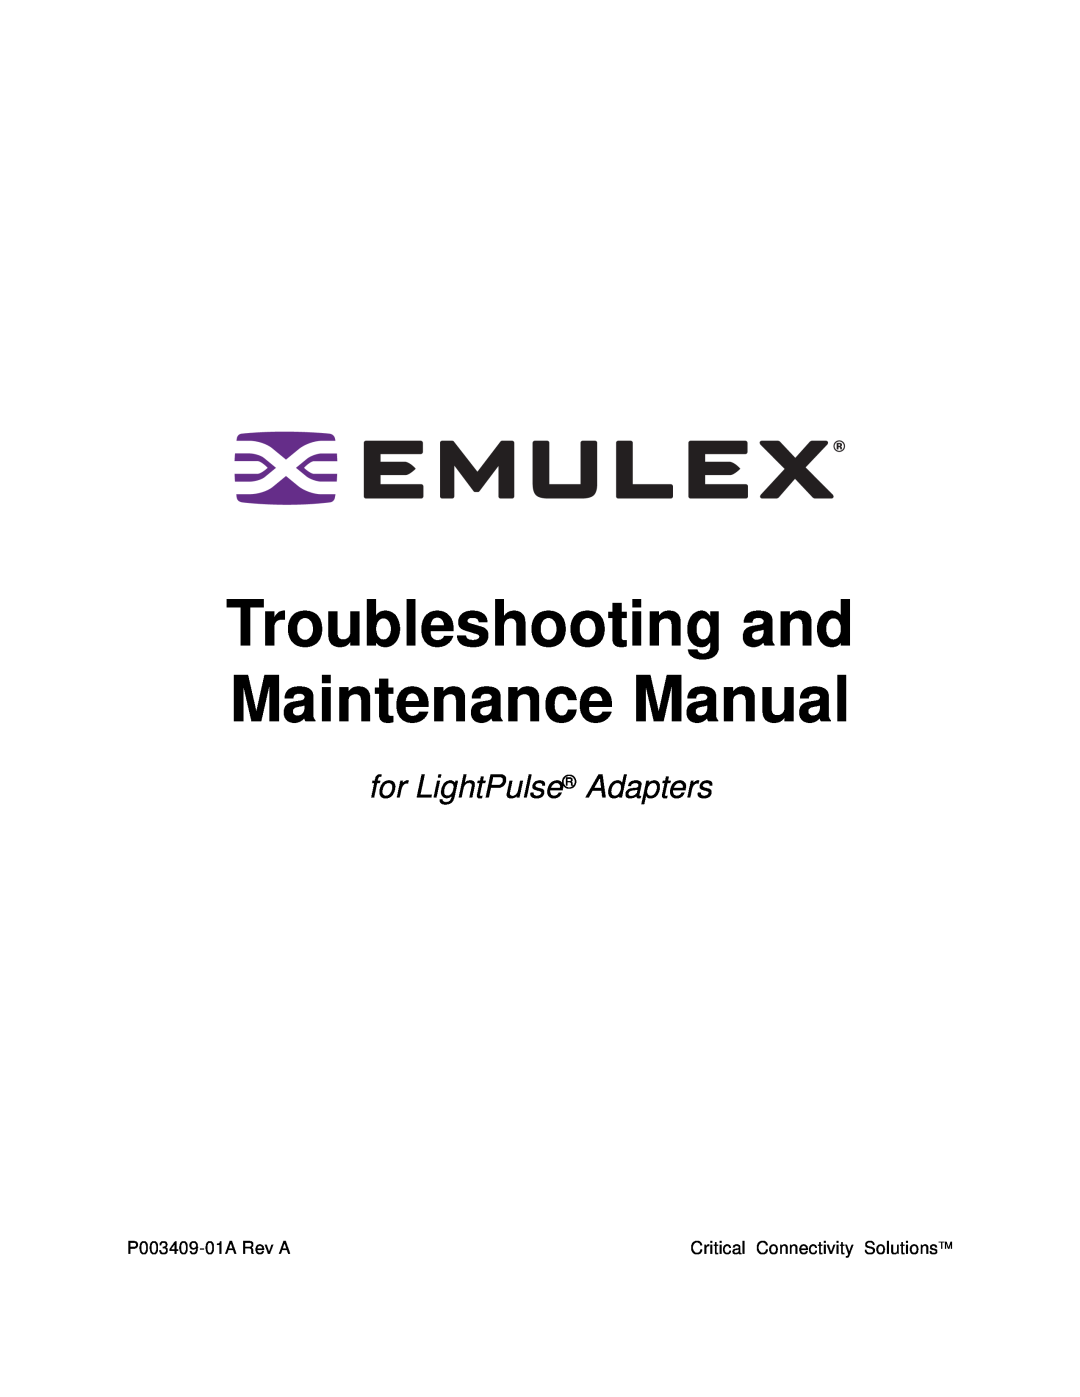 Emulex manual Troubleshooting and Maintenance Manual, for LightPulse Adapters 